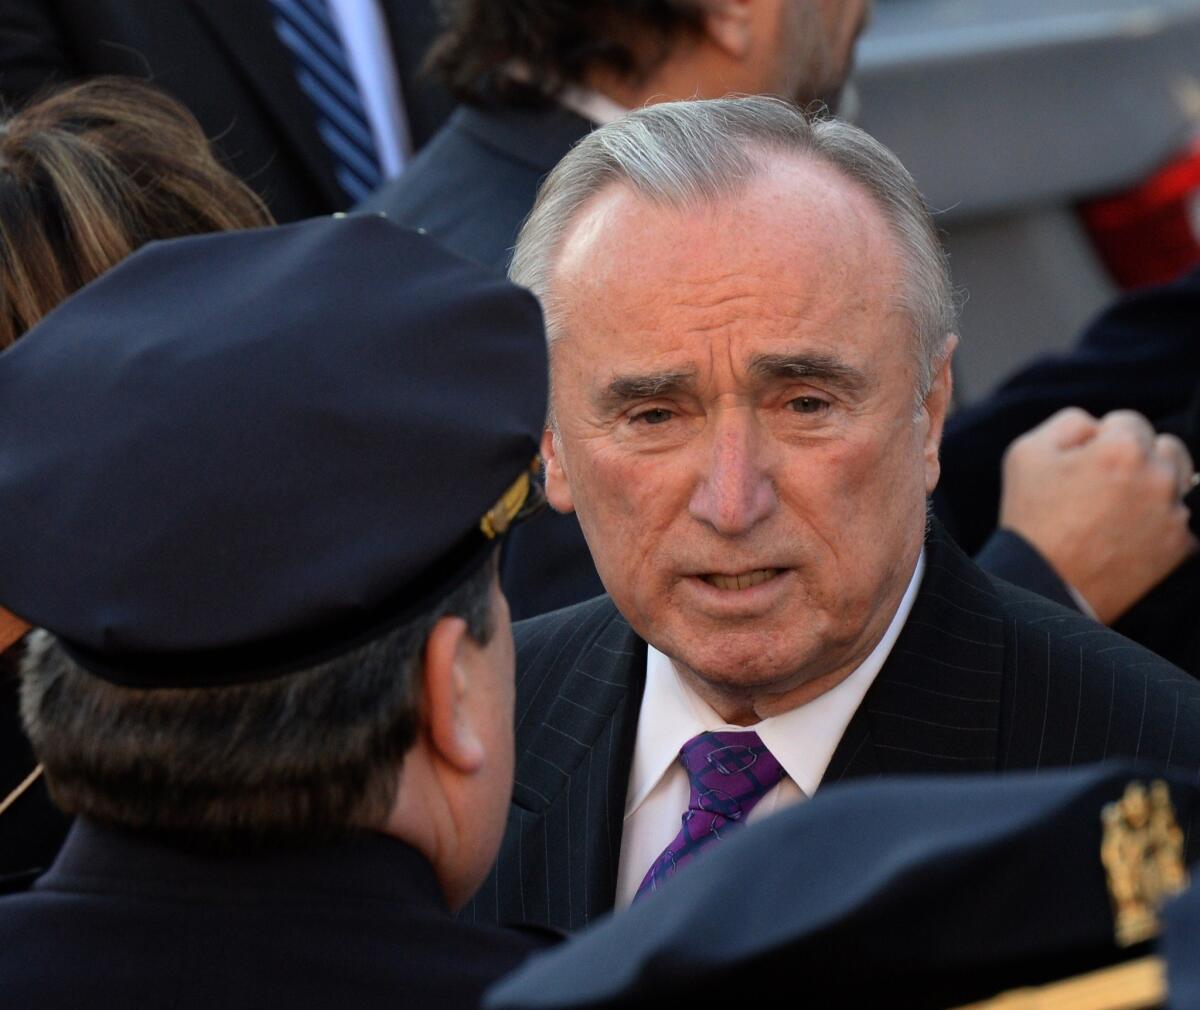 New York Police Commissioner William Bratton arrives for the funeral of New York police Officer Rafael Ramos Saturday in New York.